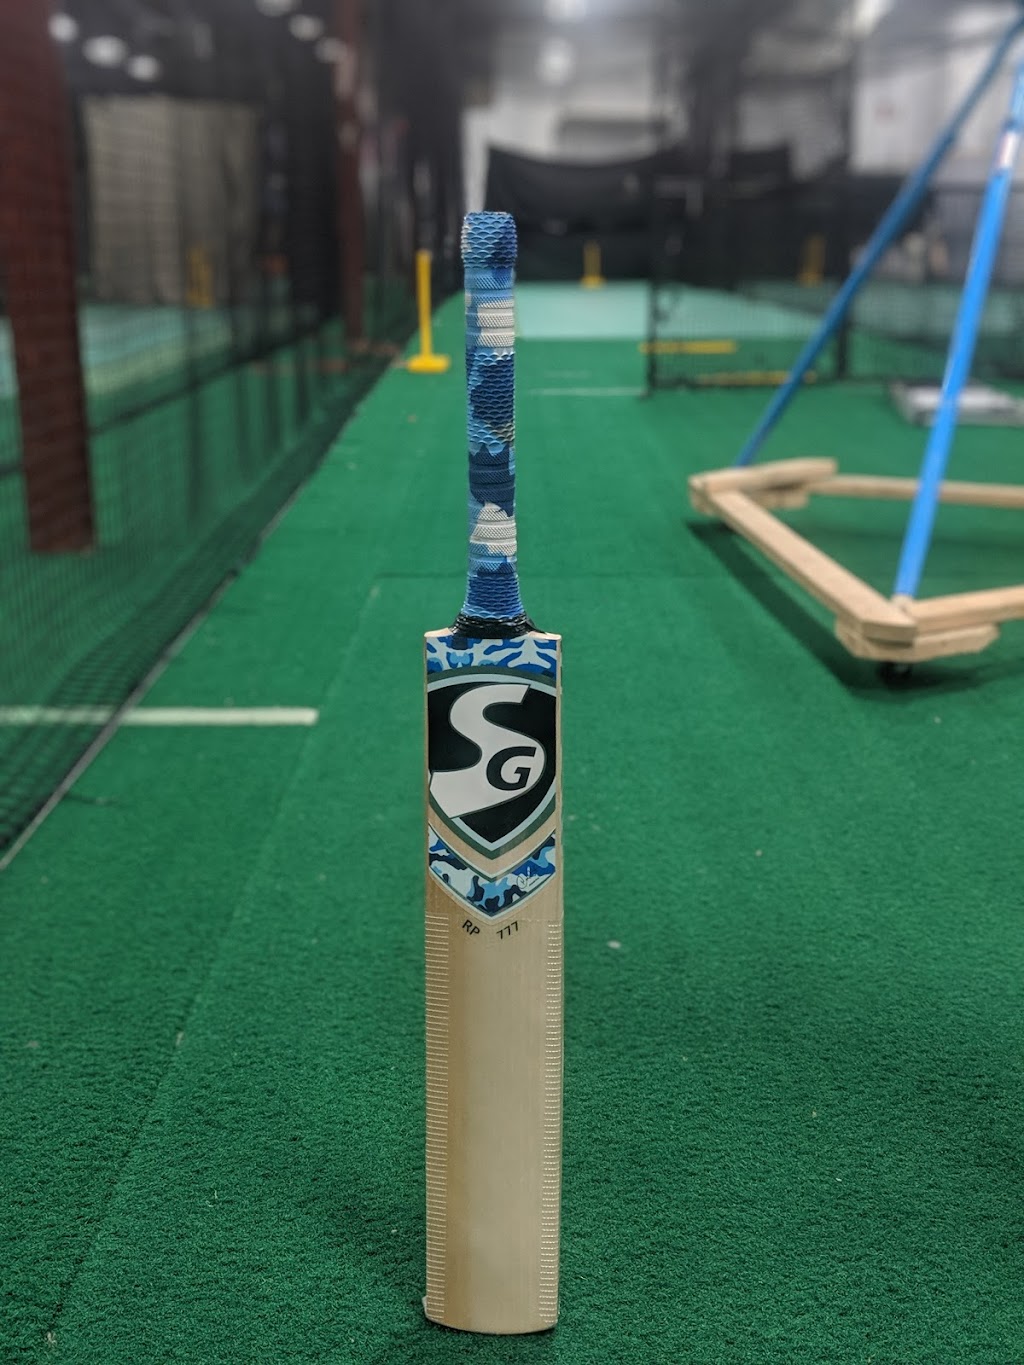 SOFF Indoor Cricket Facility | 1780 Sismet Rd Unit 3, Mississauga, ON L4W 1Y8, Canada | Phone: (647) 770-5369